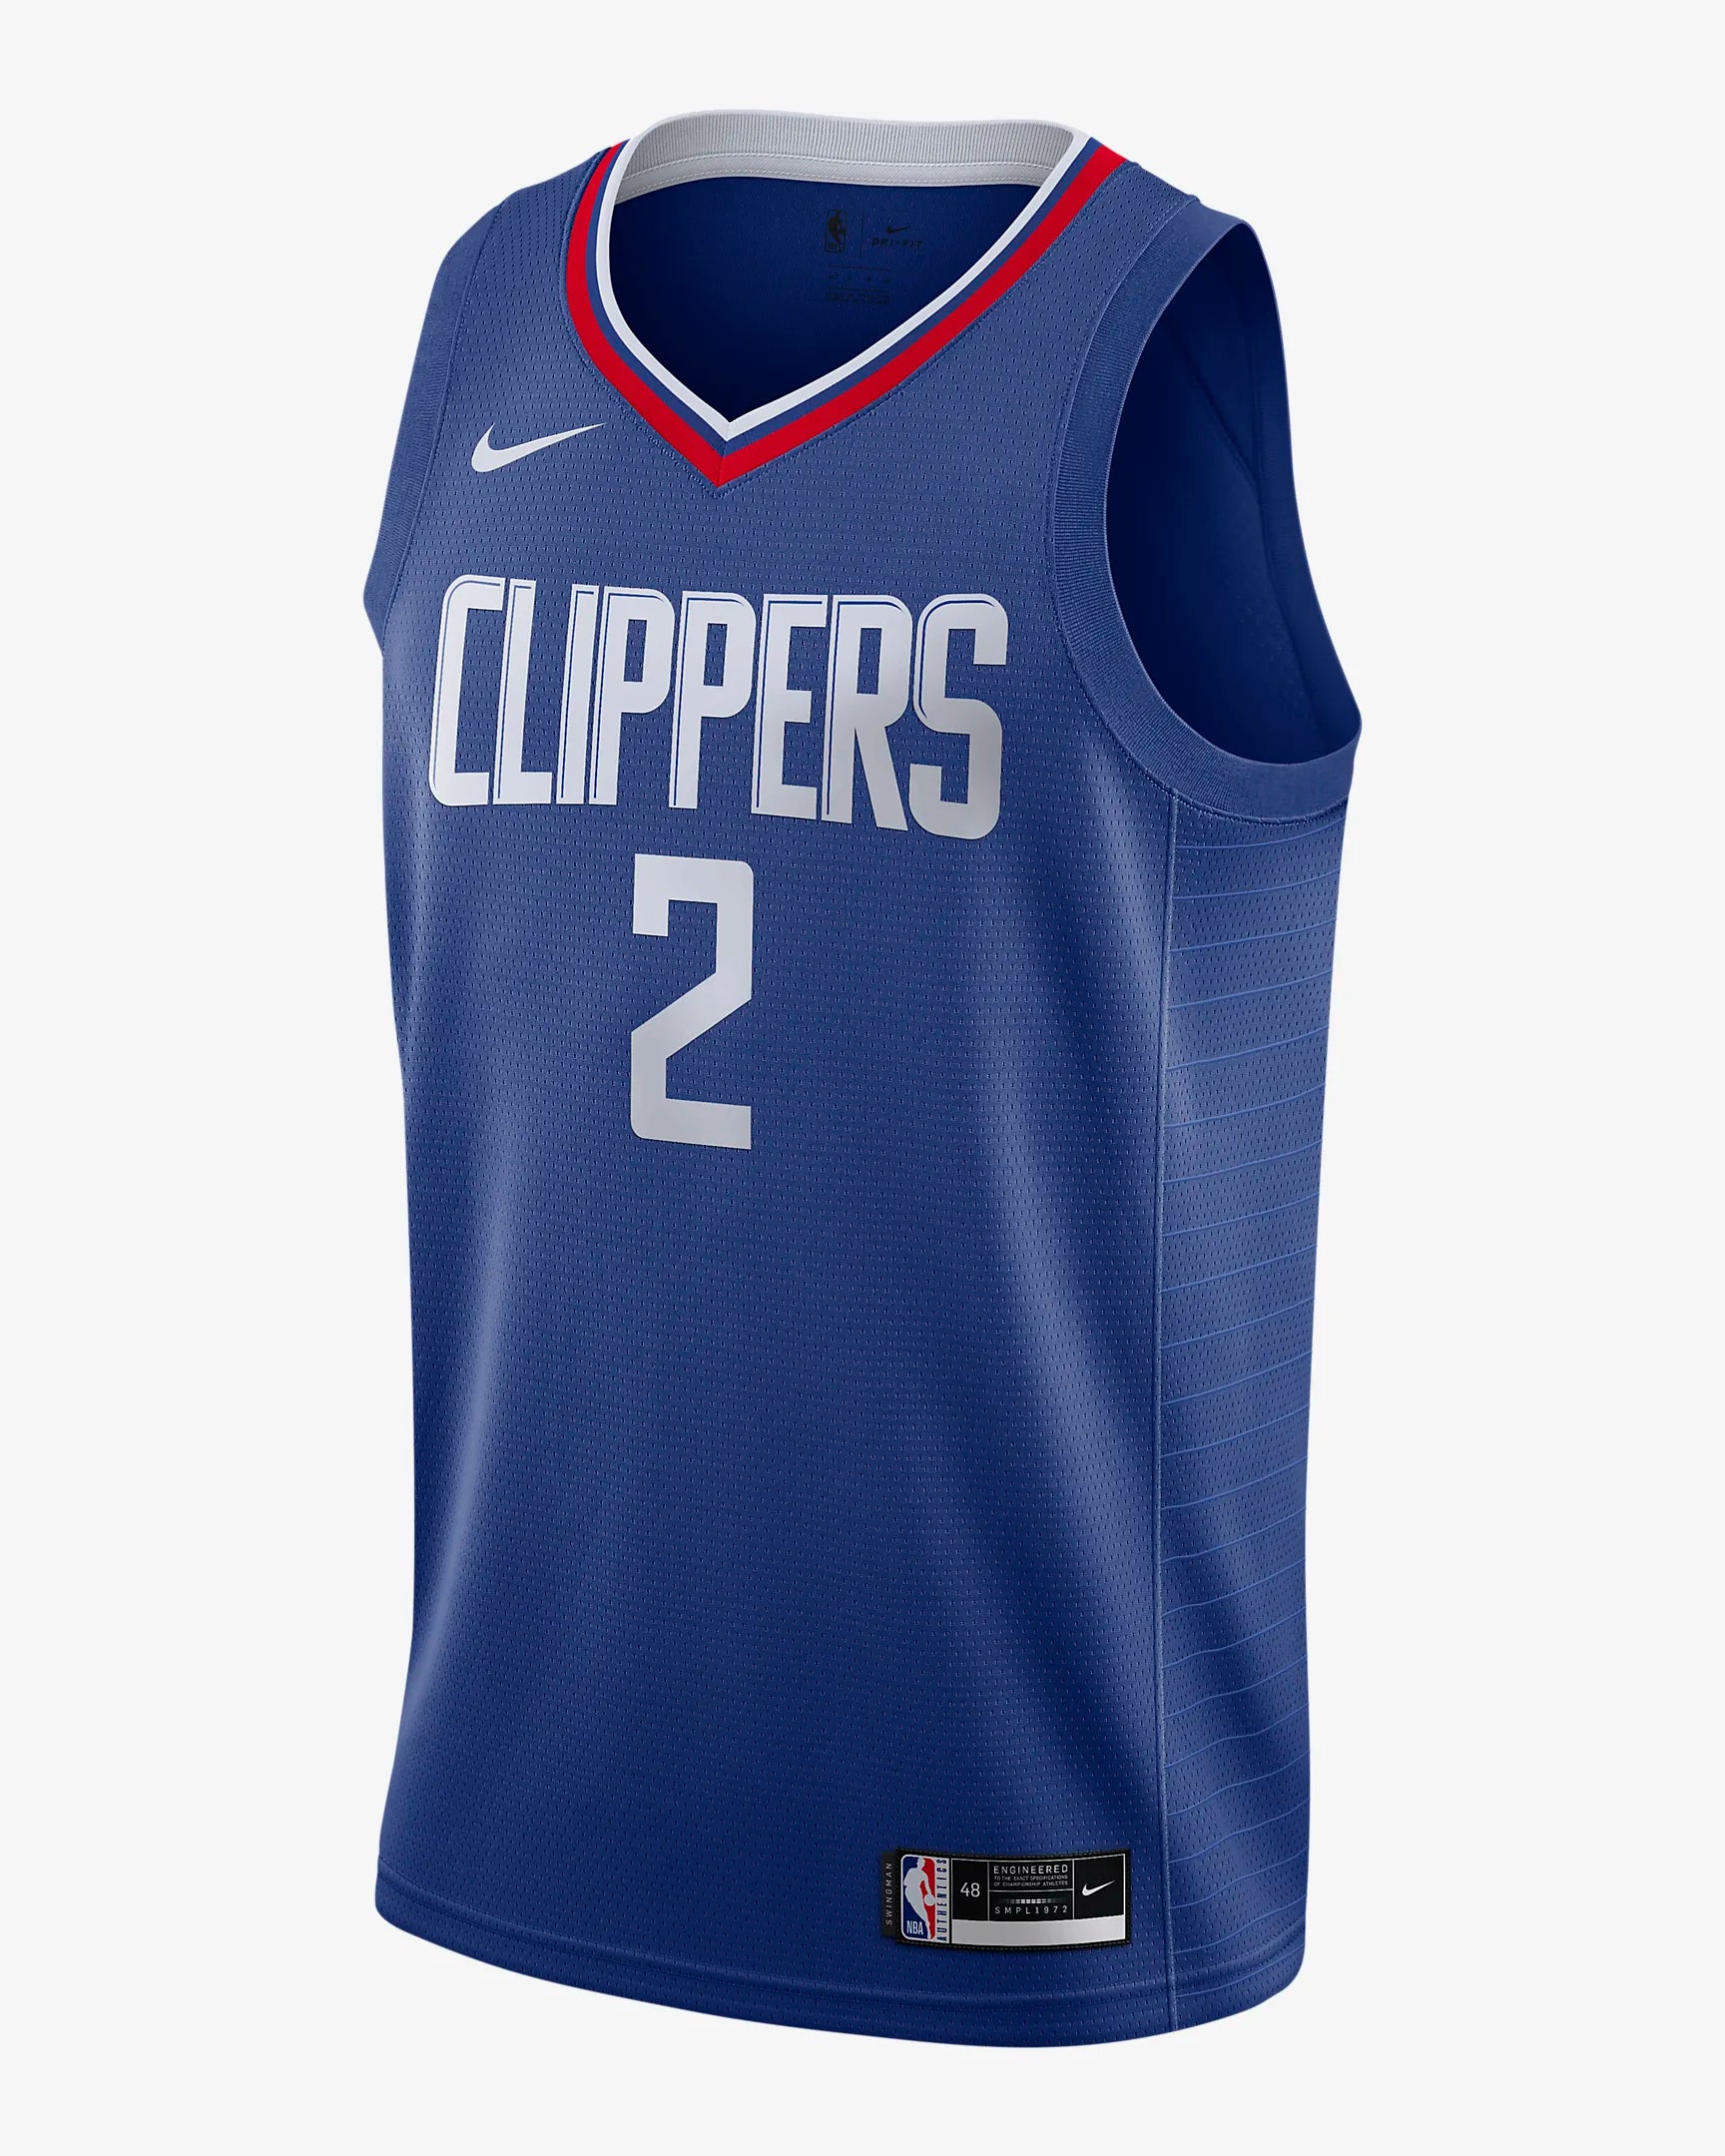 clippers jersey 2020